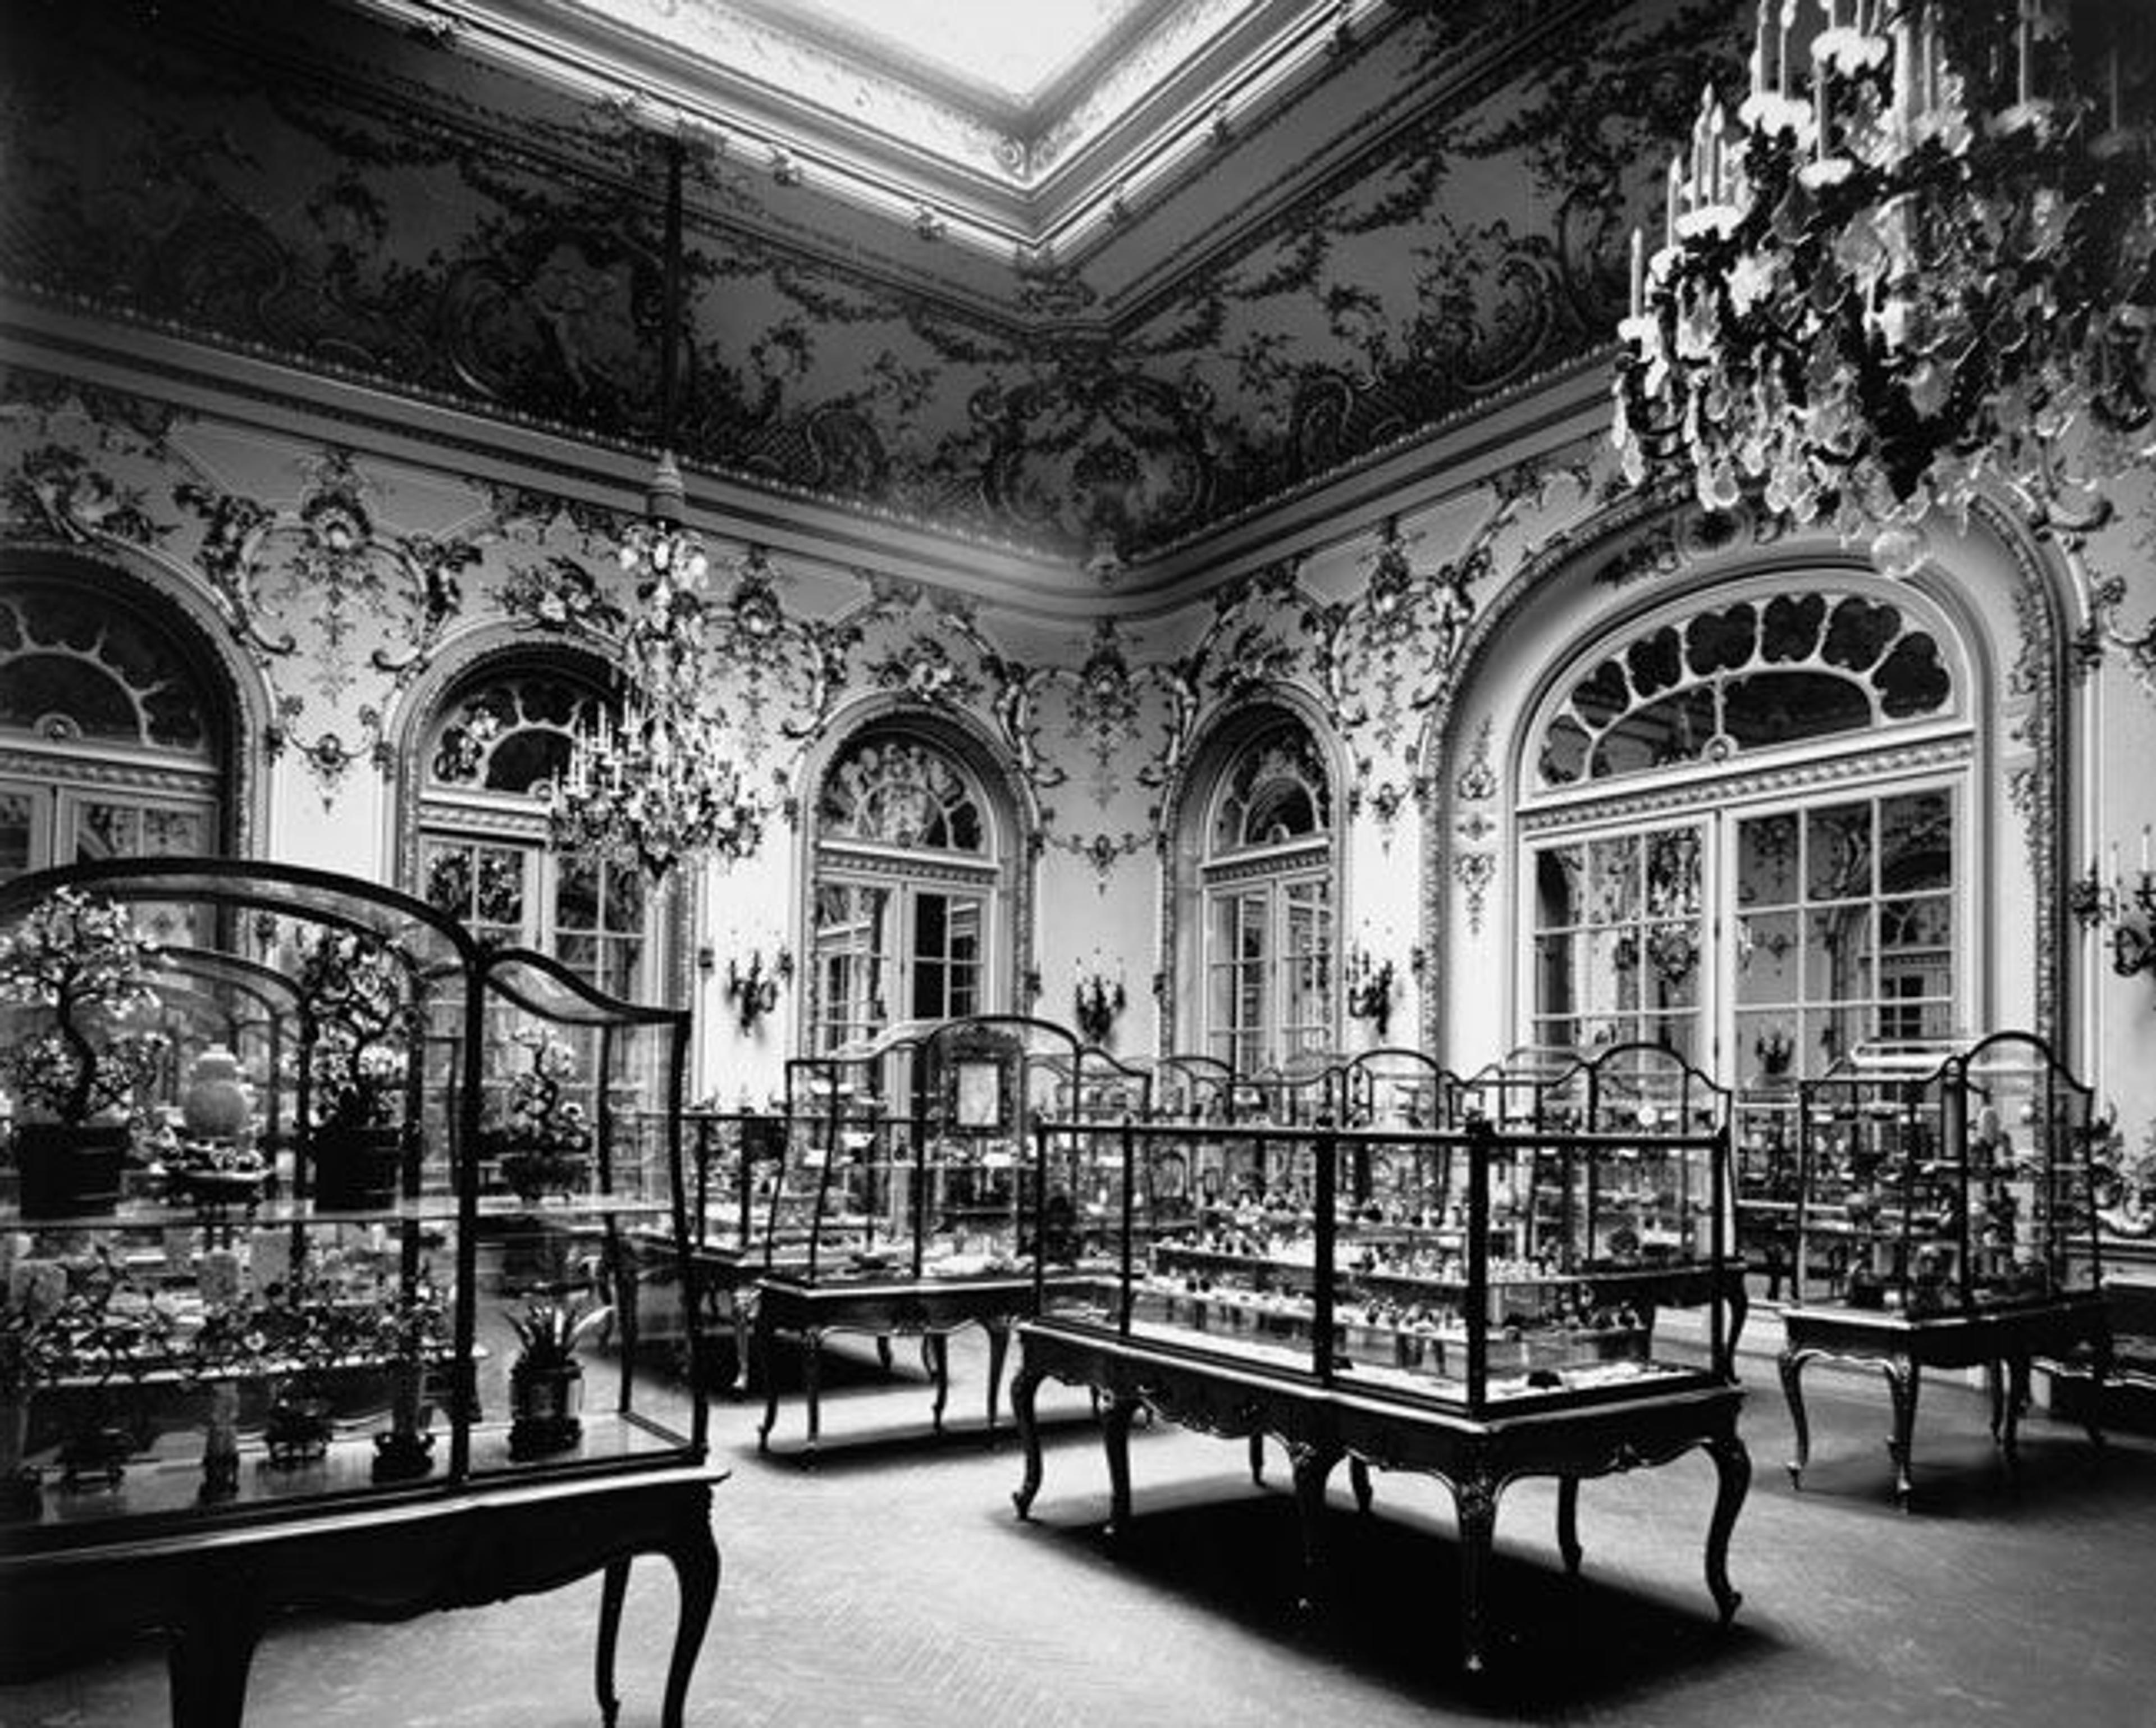 The Metropolitan Museum of Art, the Jade Room (Wing D, Room 4); View of the Bishop jade collection, as installed in the gallery; View looking northwest. Photographed March 1909. © The Metropolitan Museum of Art